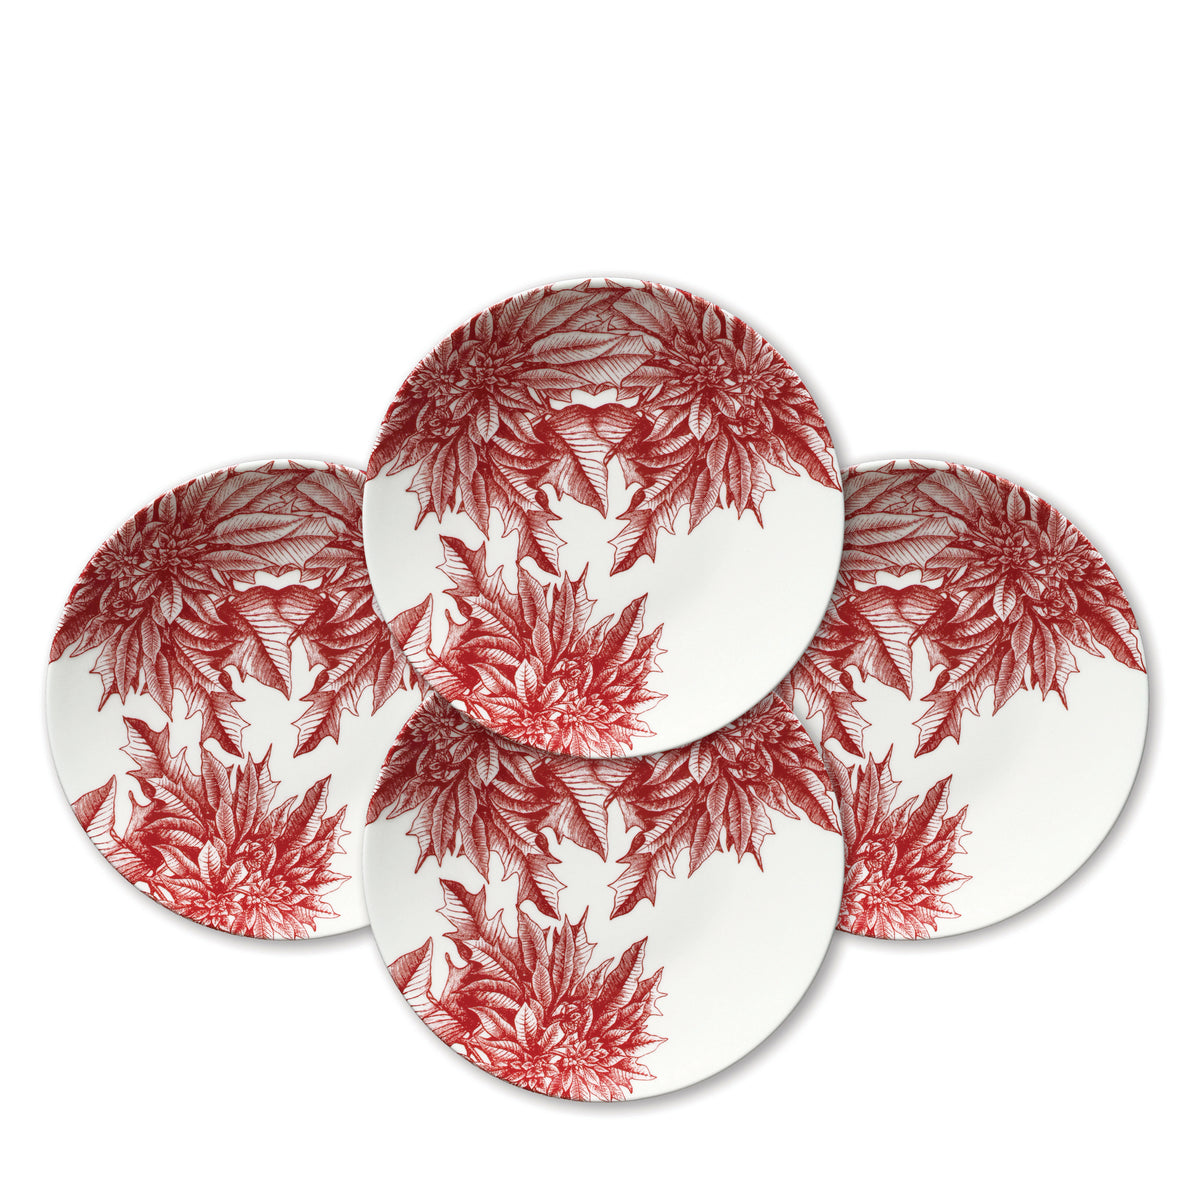 Four Poinsettia Coupe Salad Plates by Caskata Artisanal Home arranged in a clustered formation, each adorned with intricate poinsettia floral patterns on one side, perfect for your holiday table.